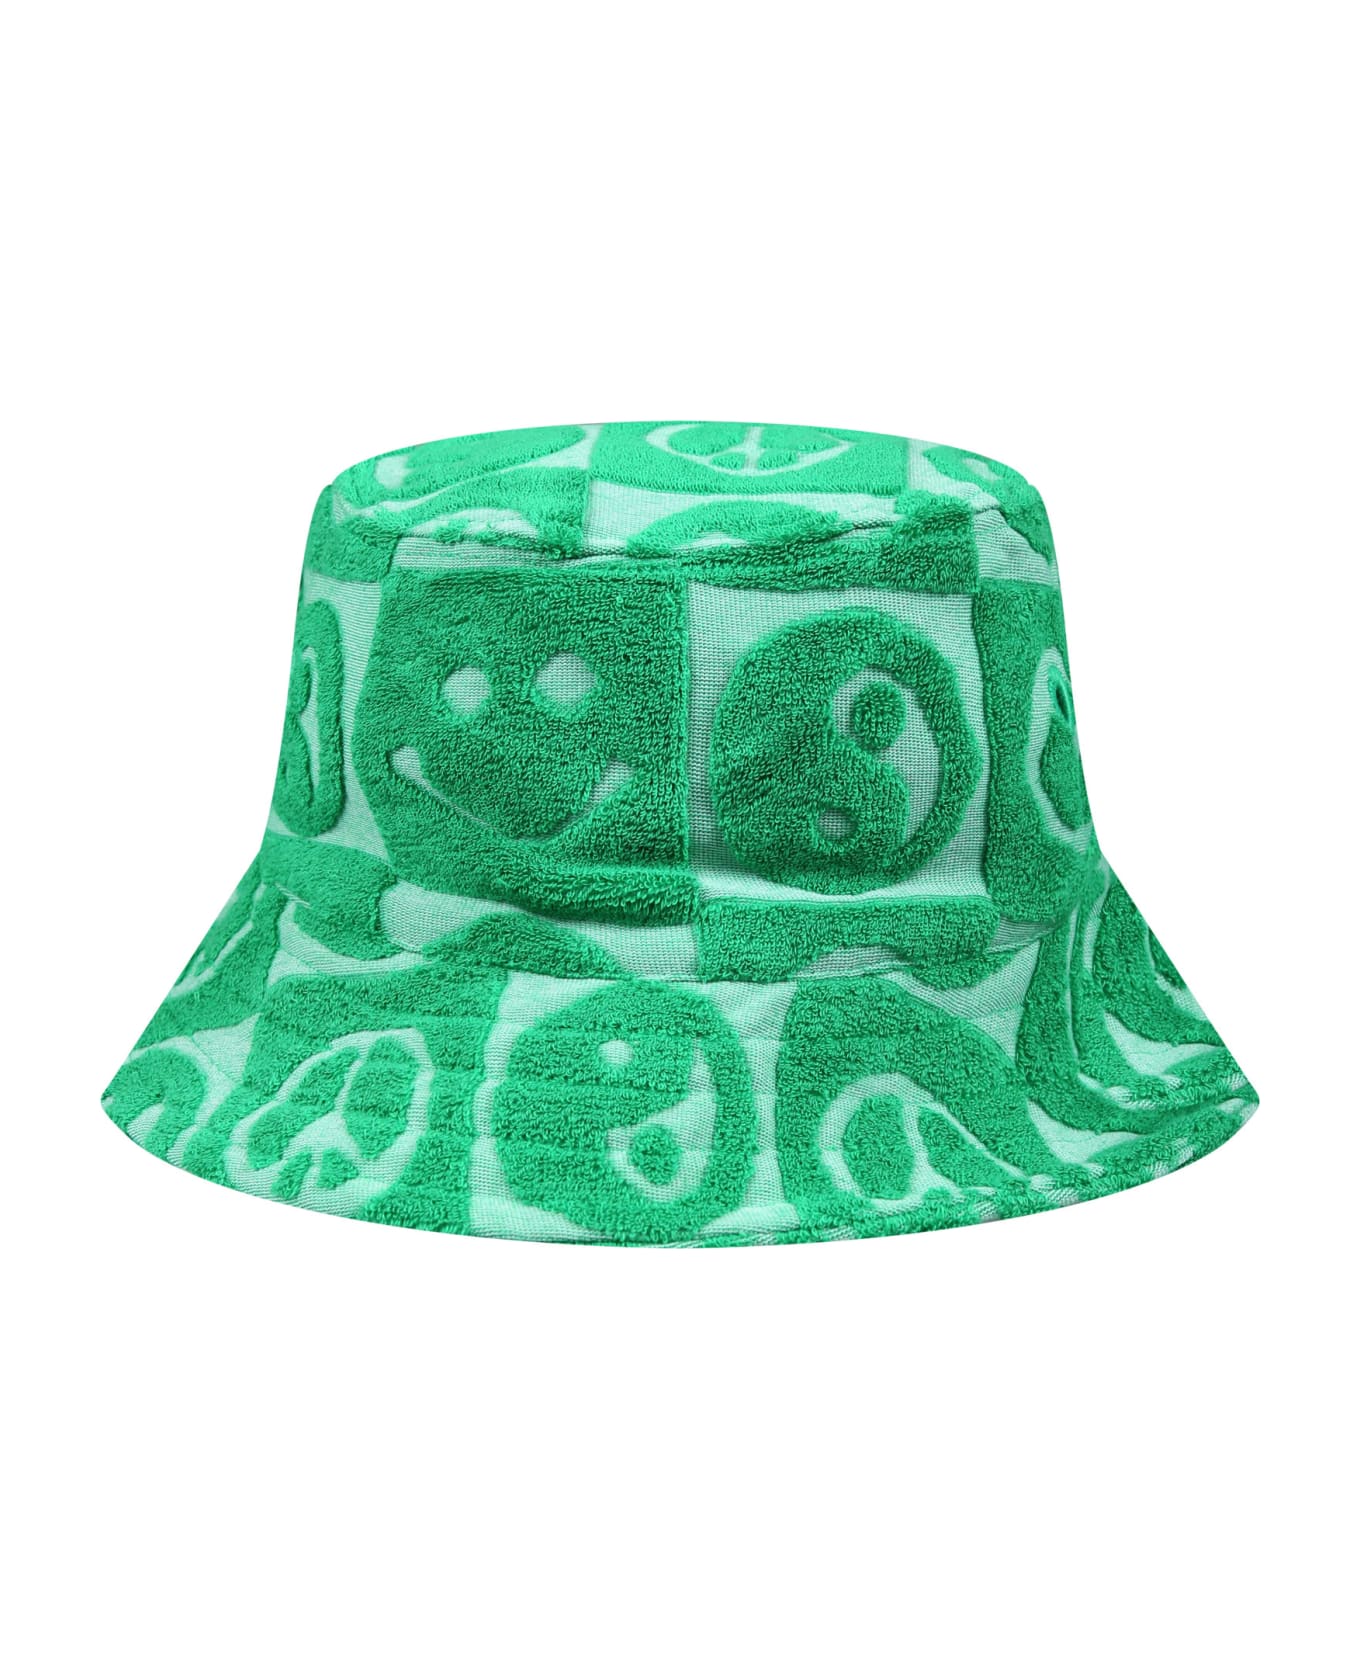 Molo Green Cloche For Kids With Yin And Yang - Green